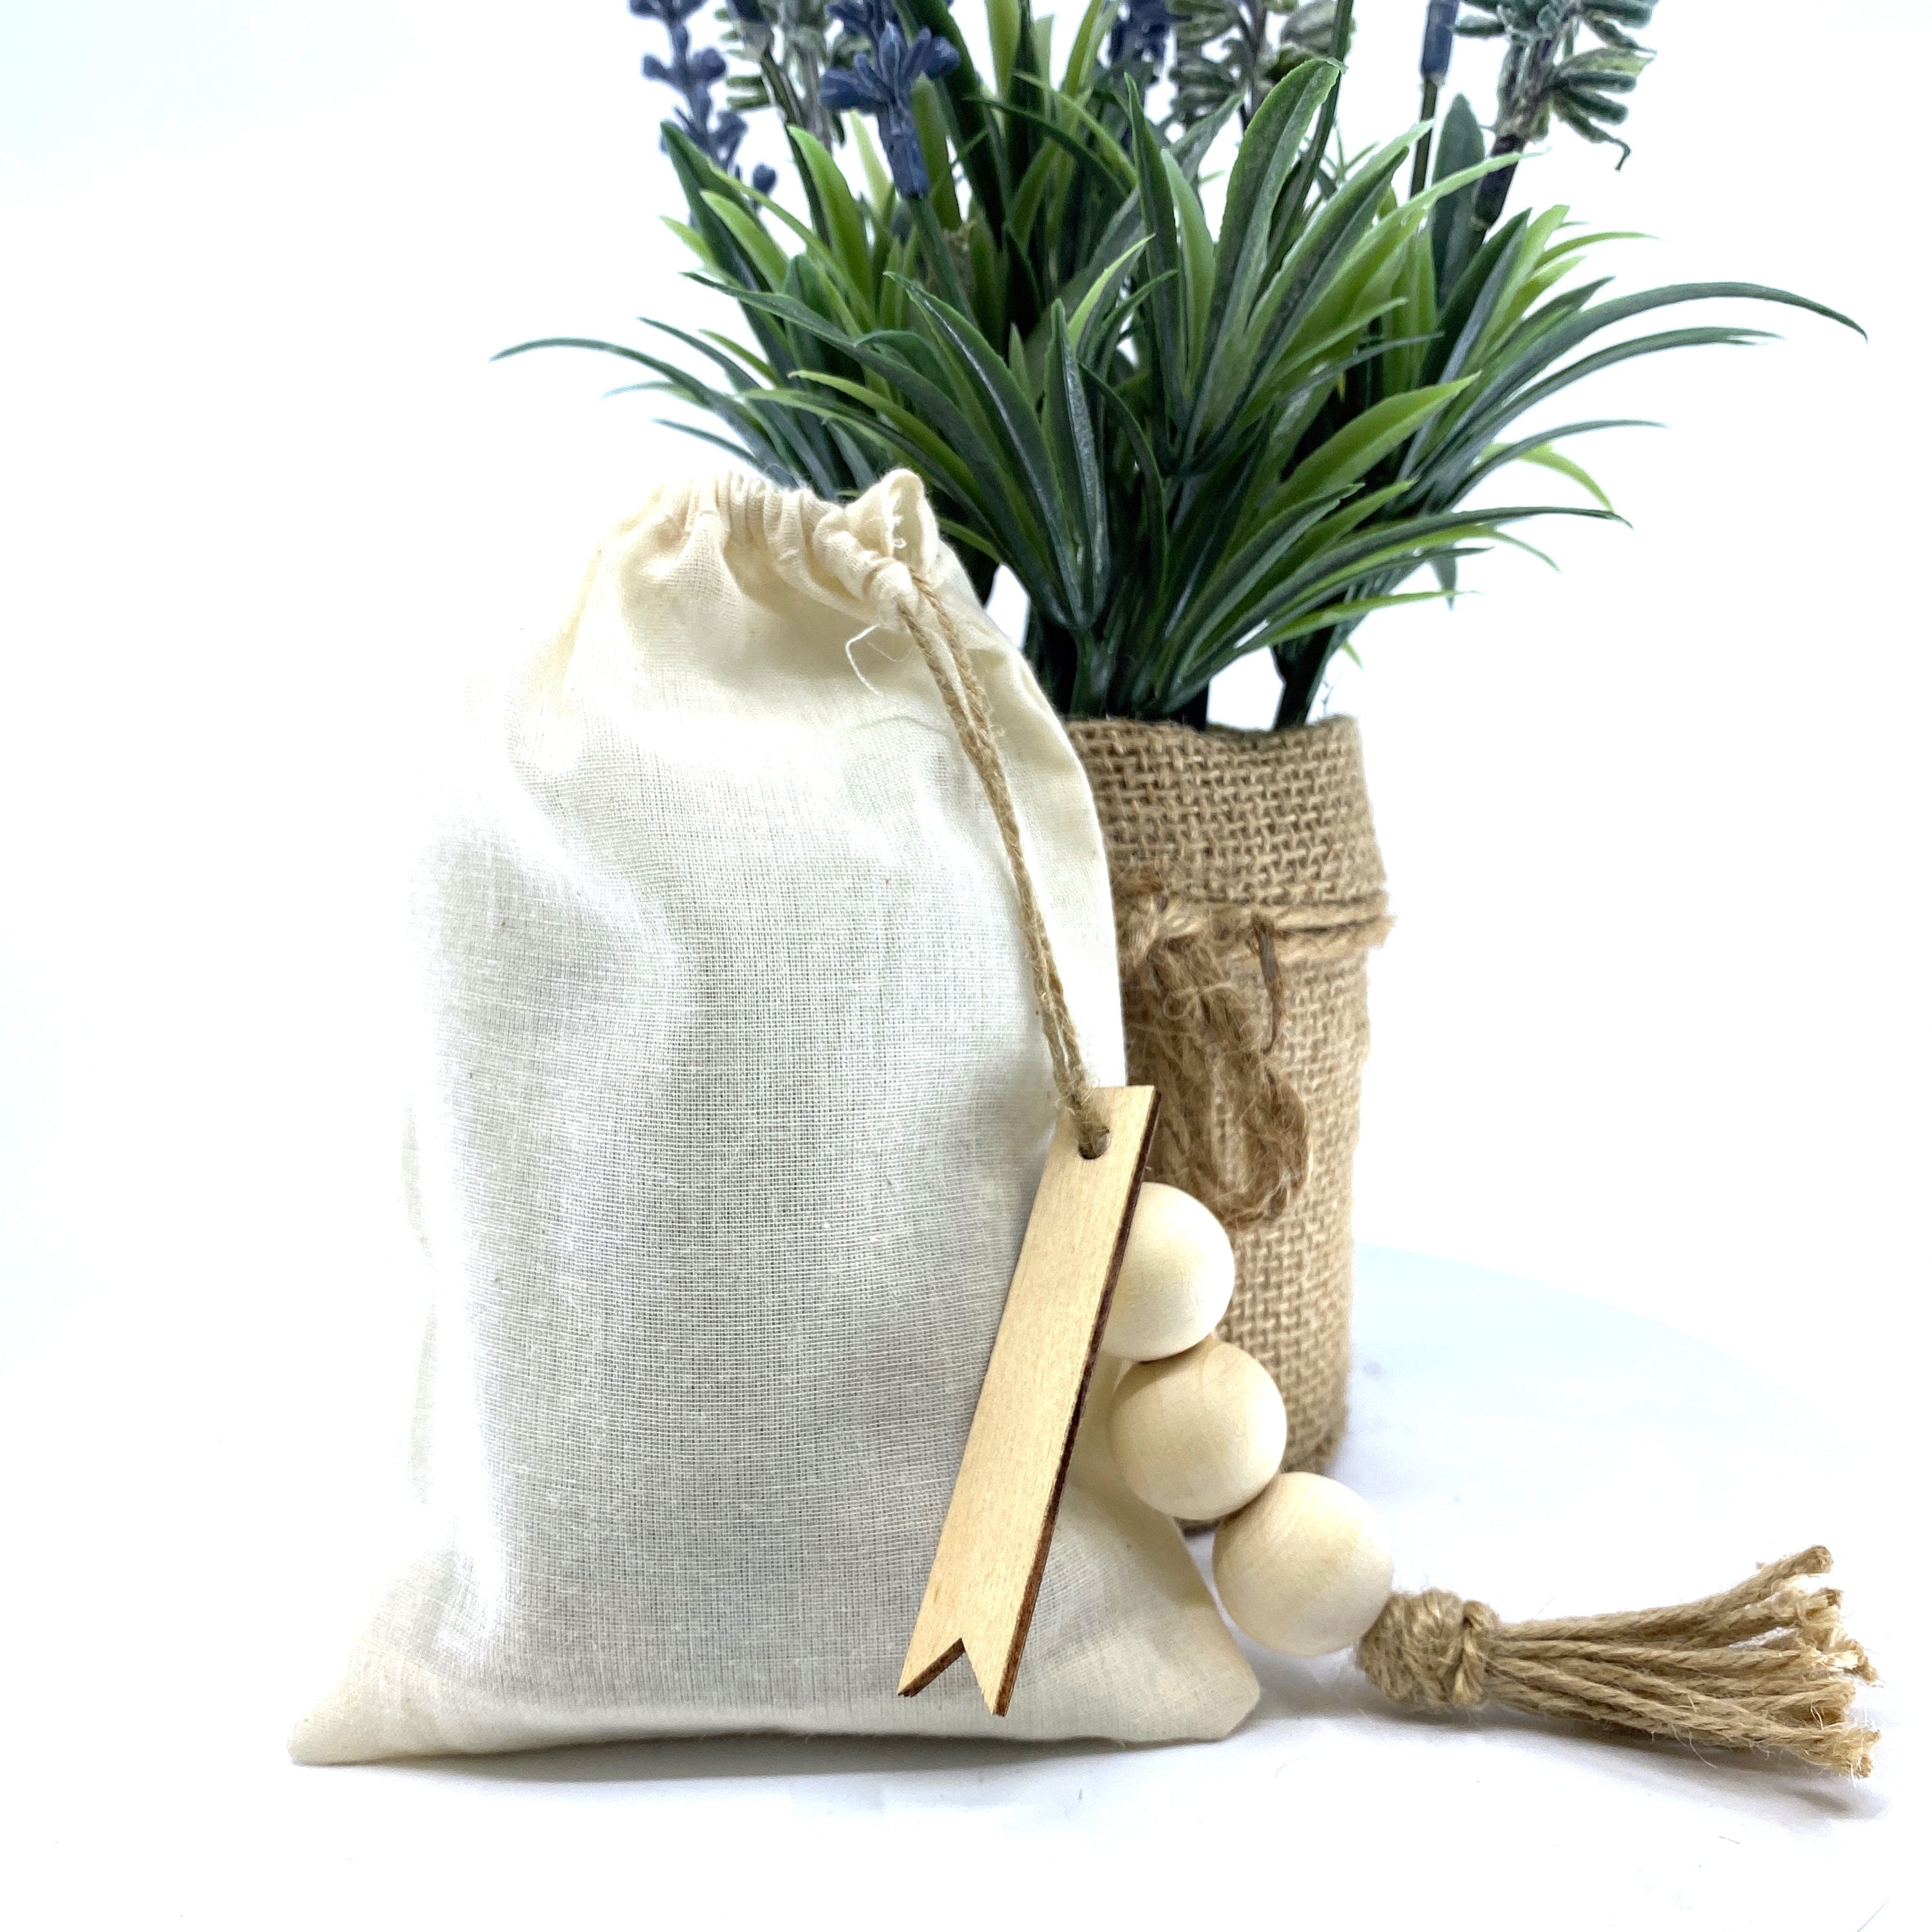 100% Naturally Dried Lavender Flowers, Jute & Wooden Beaded Drawstring